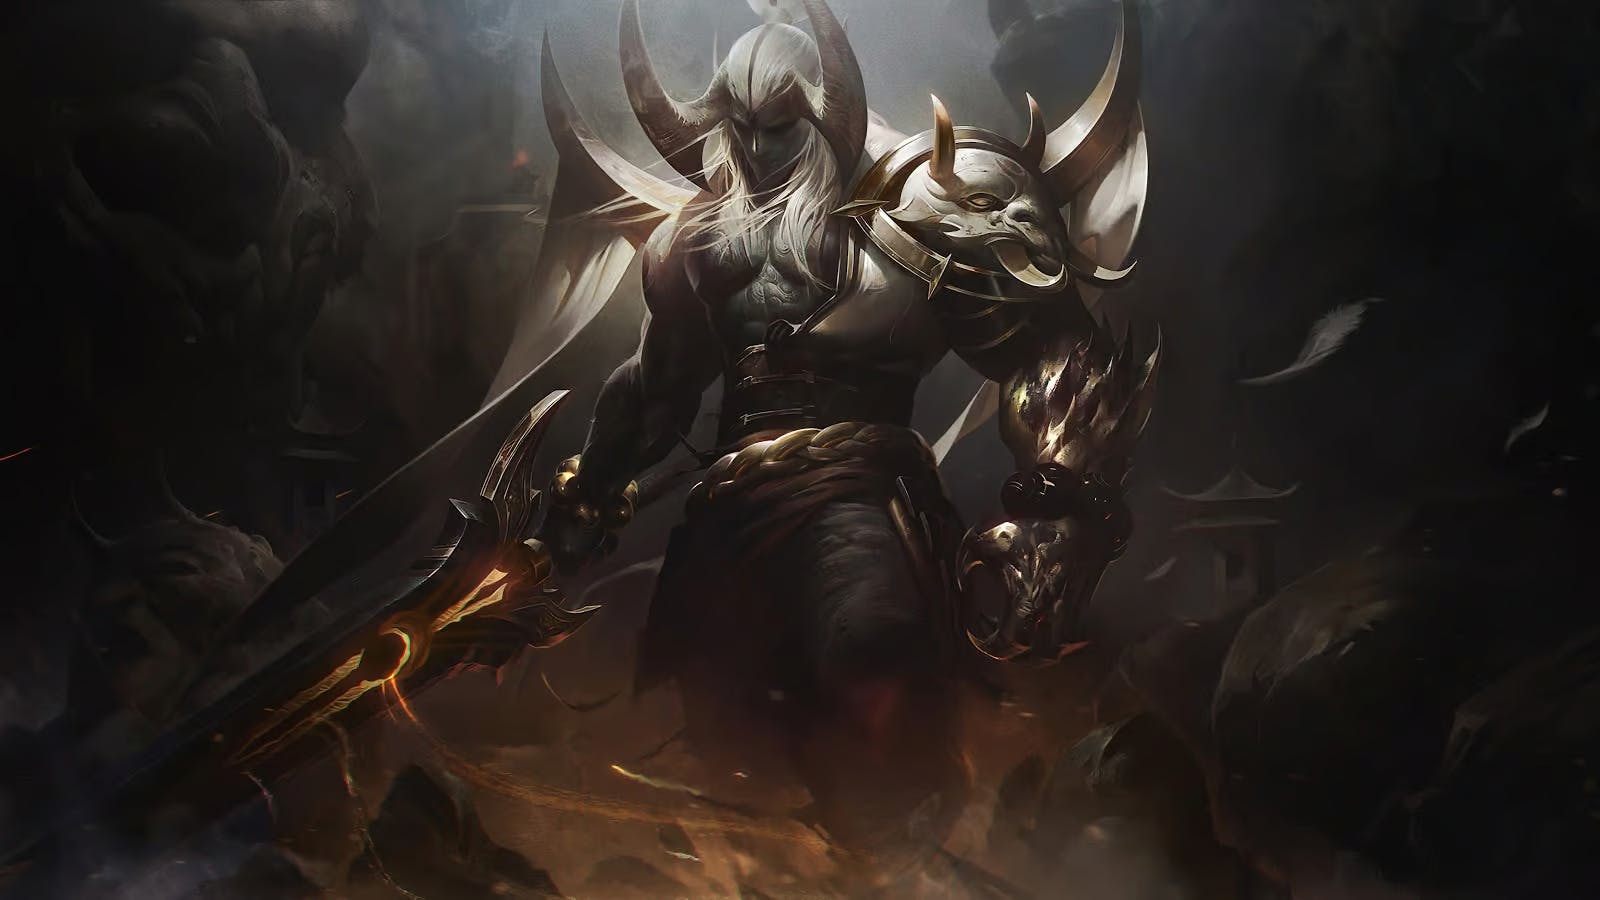 Artwork for the Blood Moon Aatrox has been teased for TFT Set 11. 